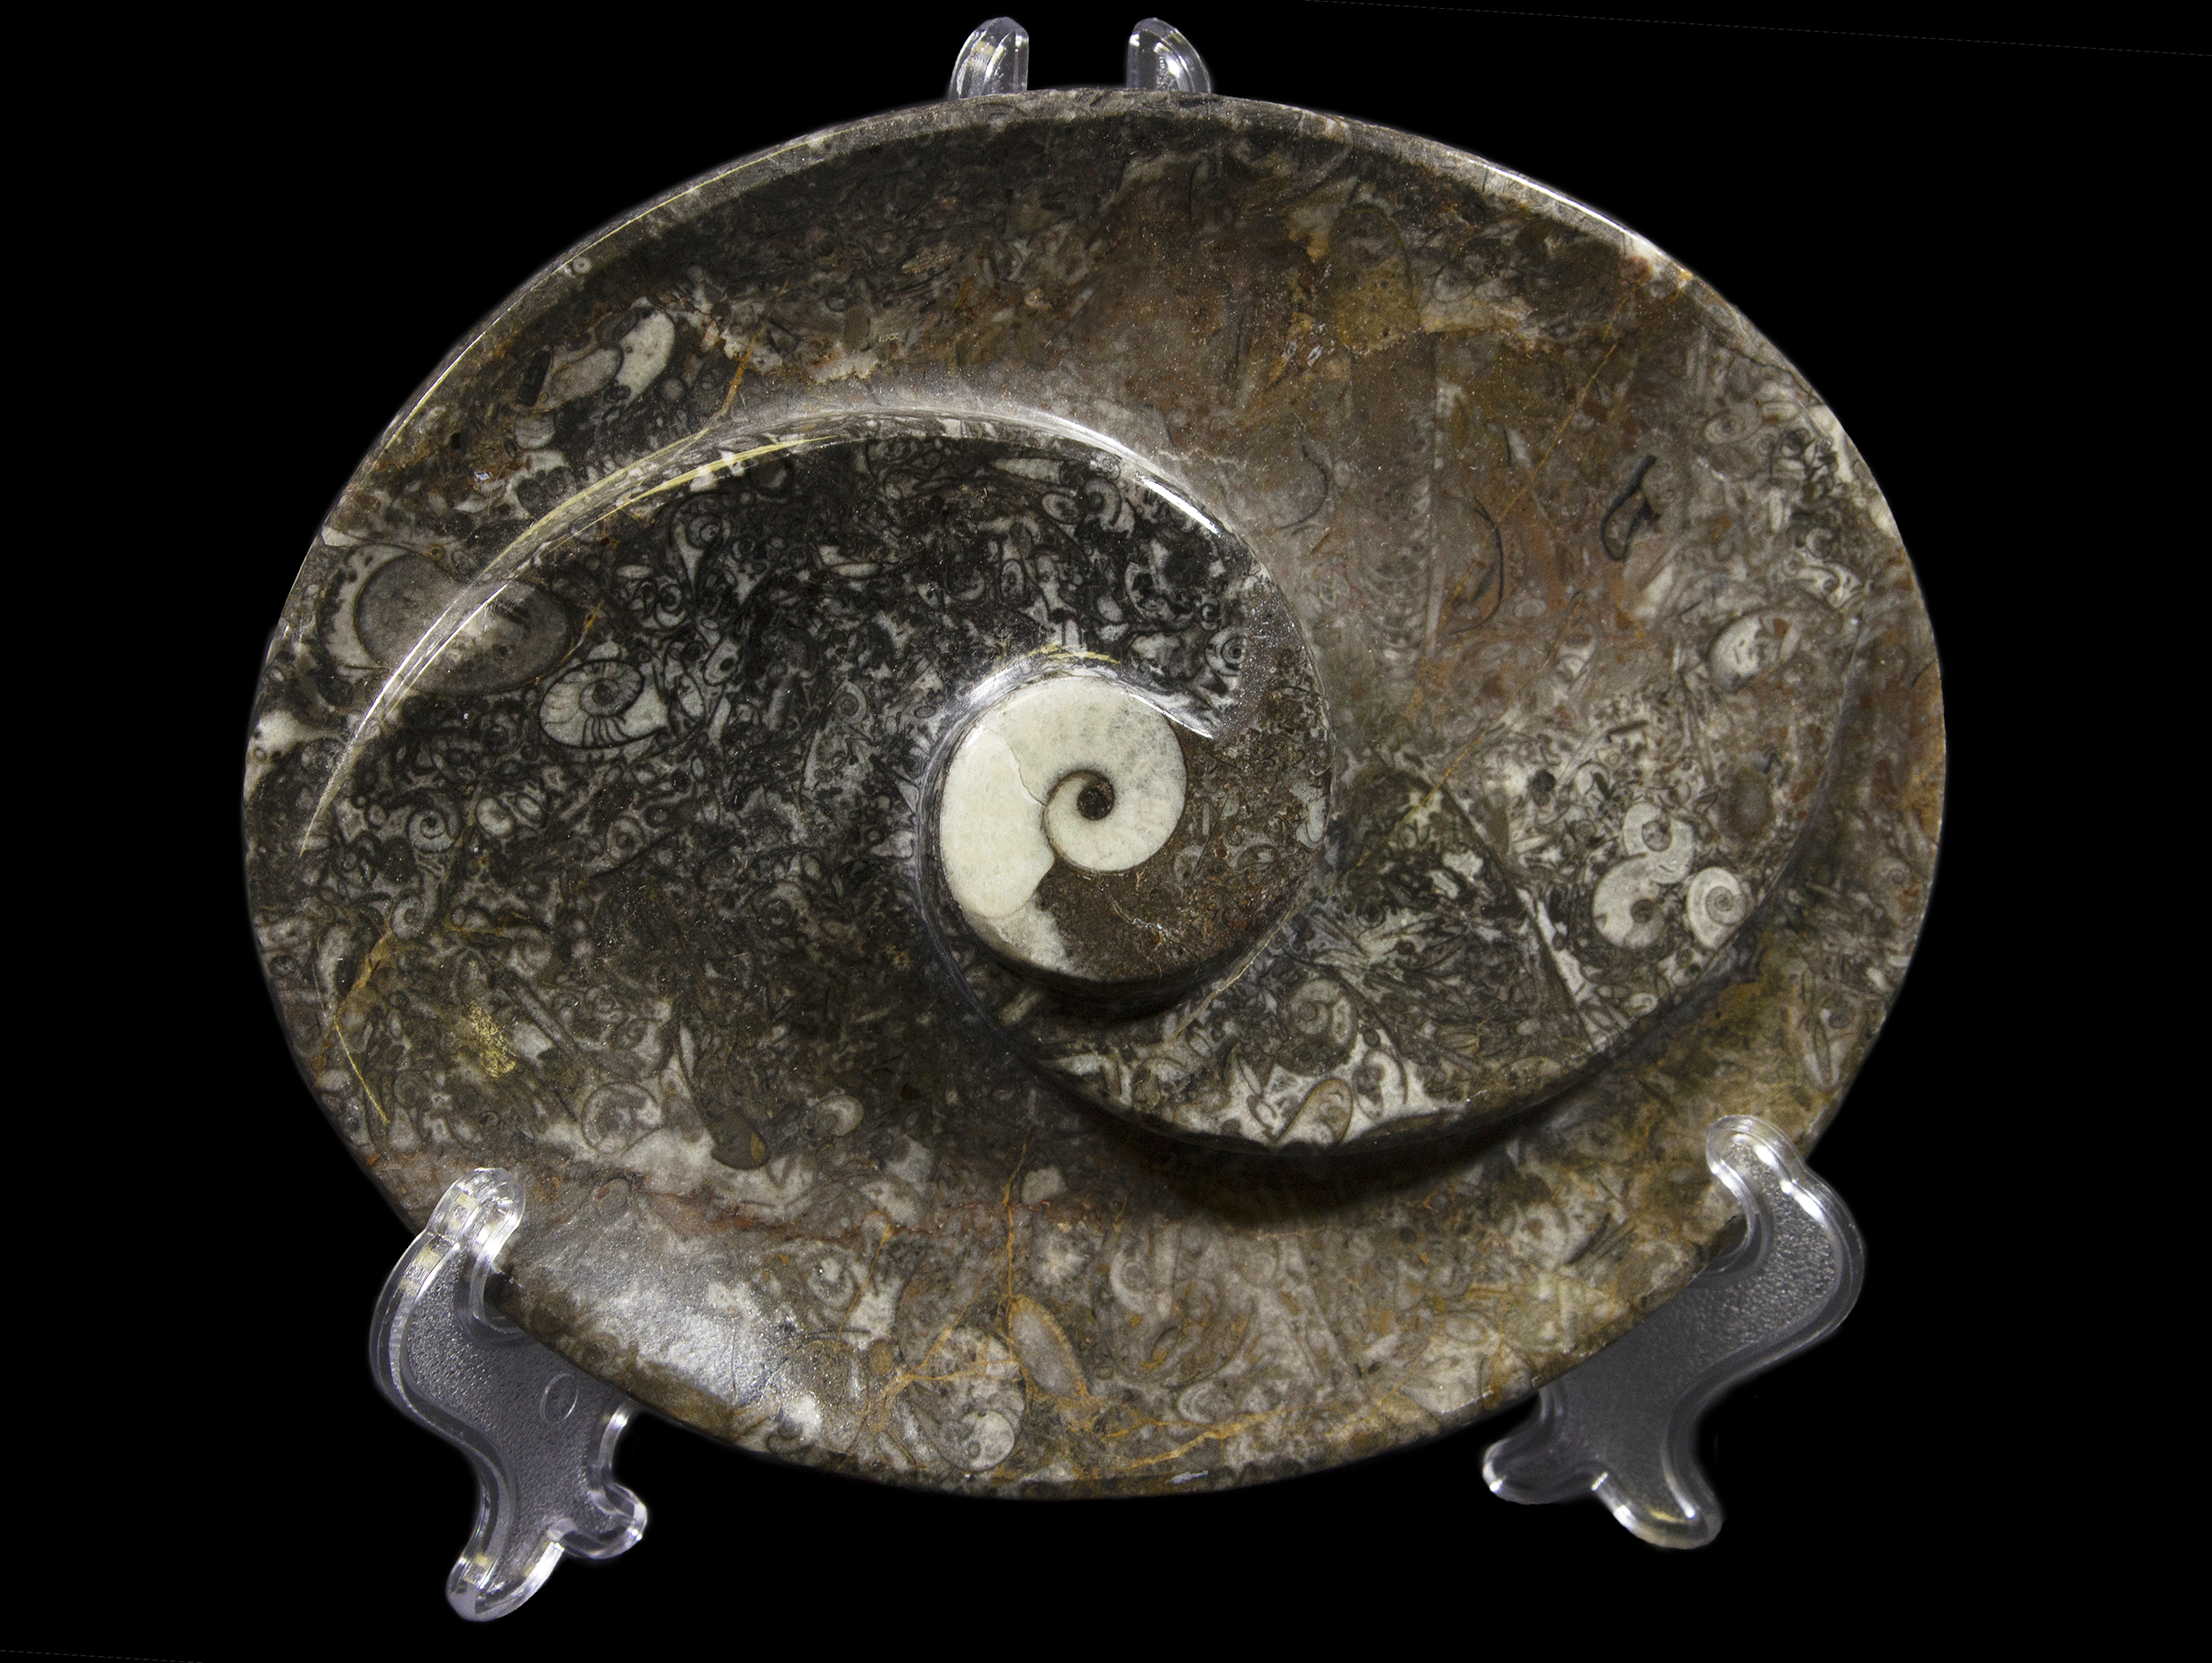 Ammonite and Orthoceras Center Oval Spiral Tray on display stand